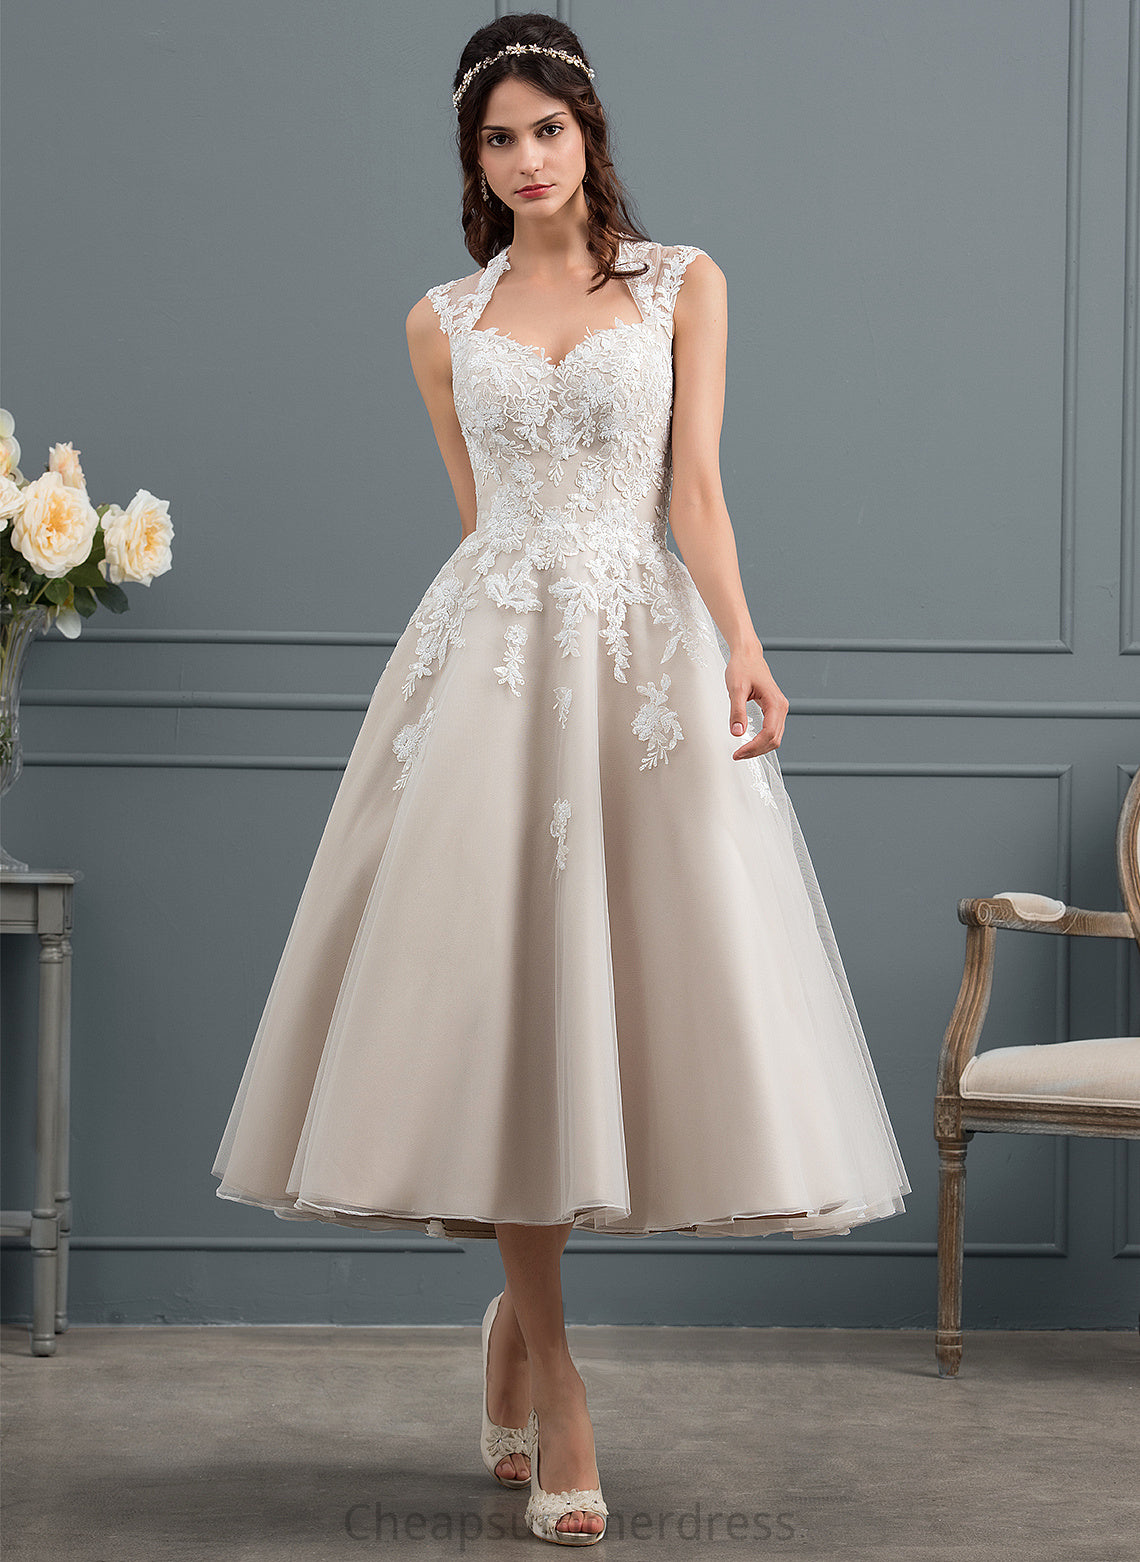 Sweetheart Sequins Tea-Length With Tulle Ball-Gown/Princess Dress Wedding Evie Wedding Dresses